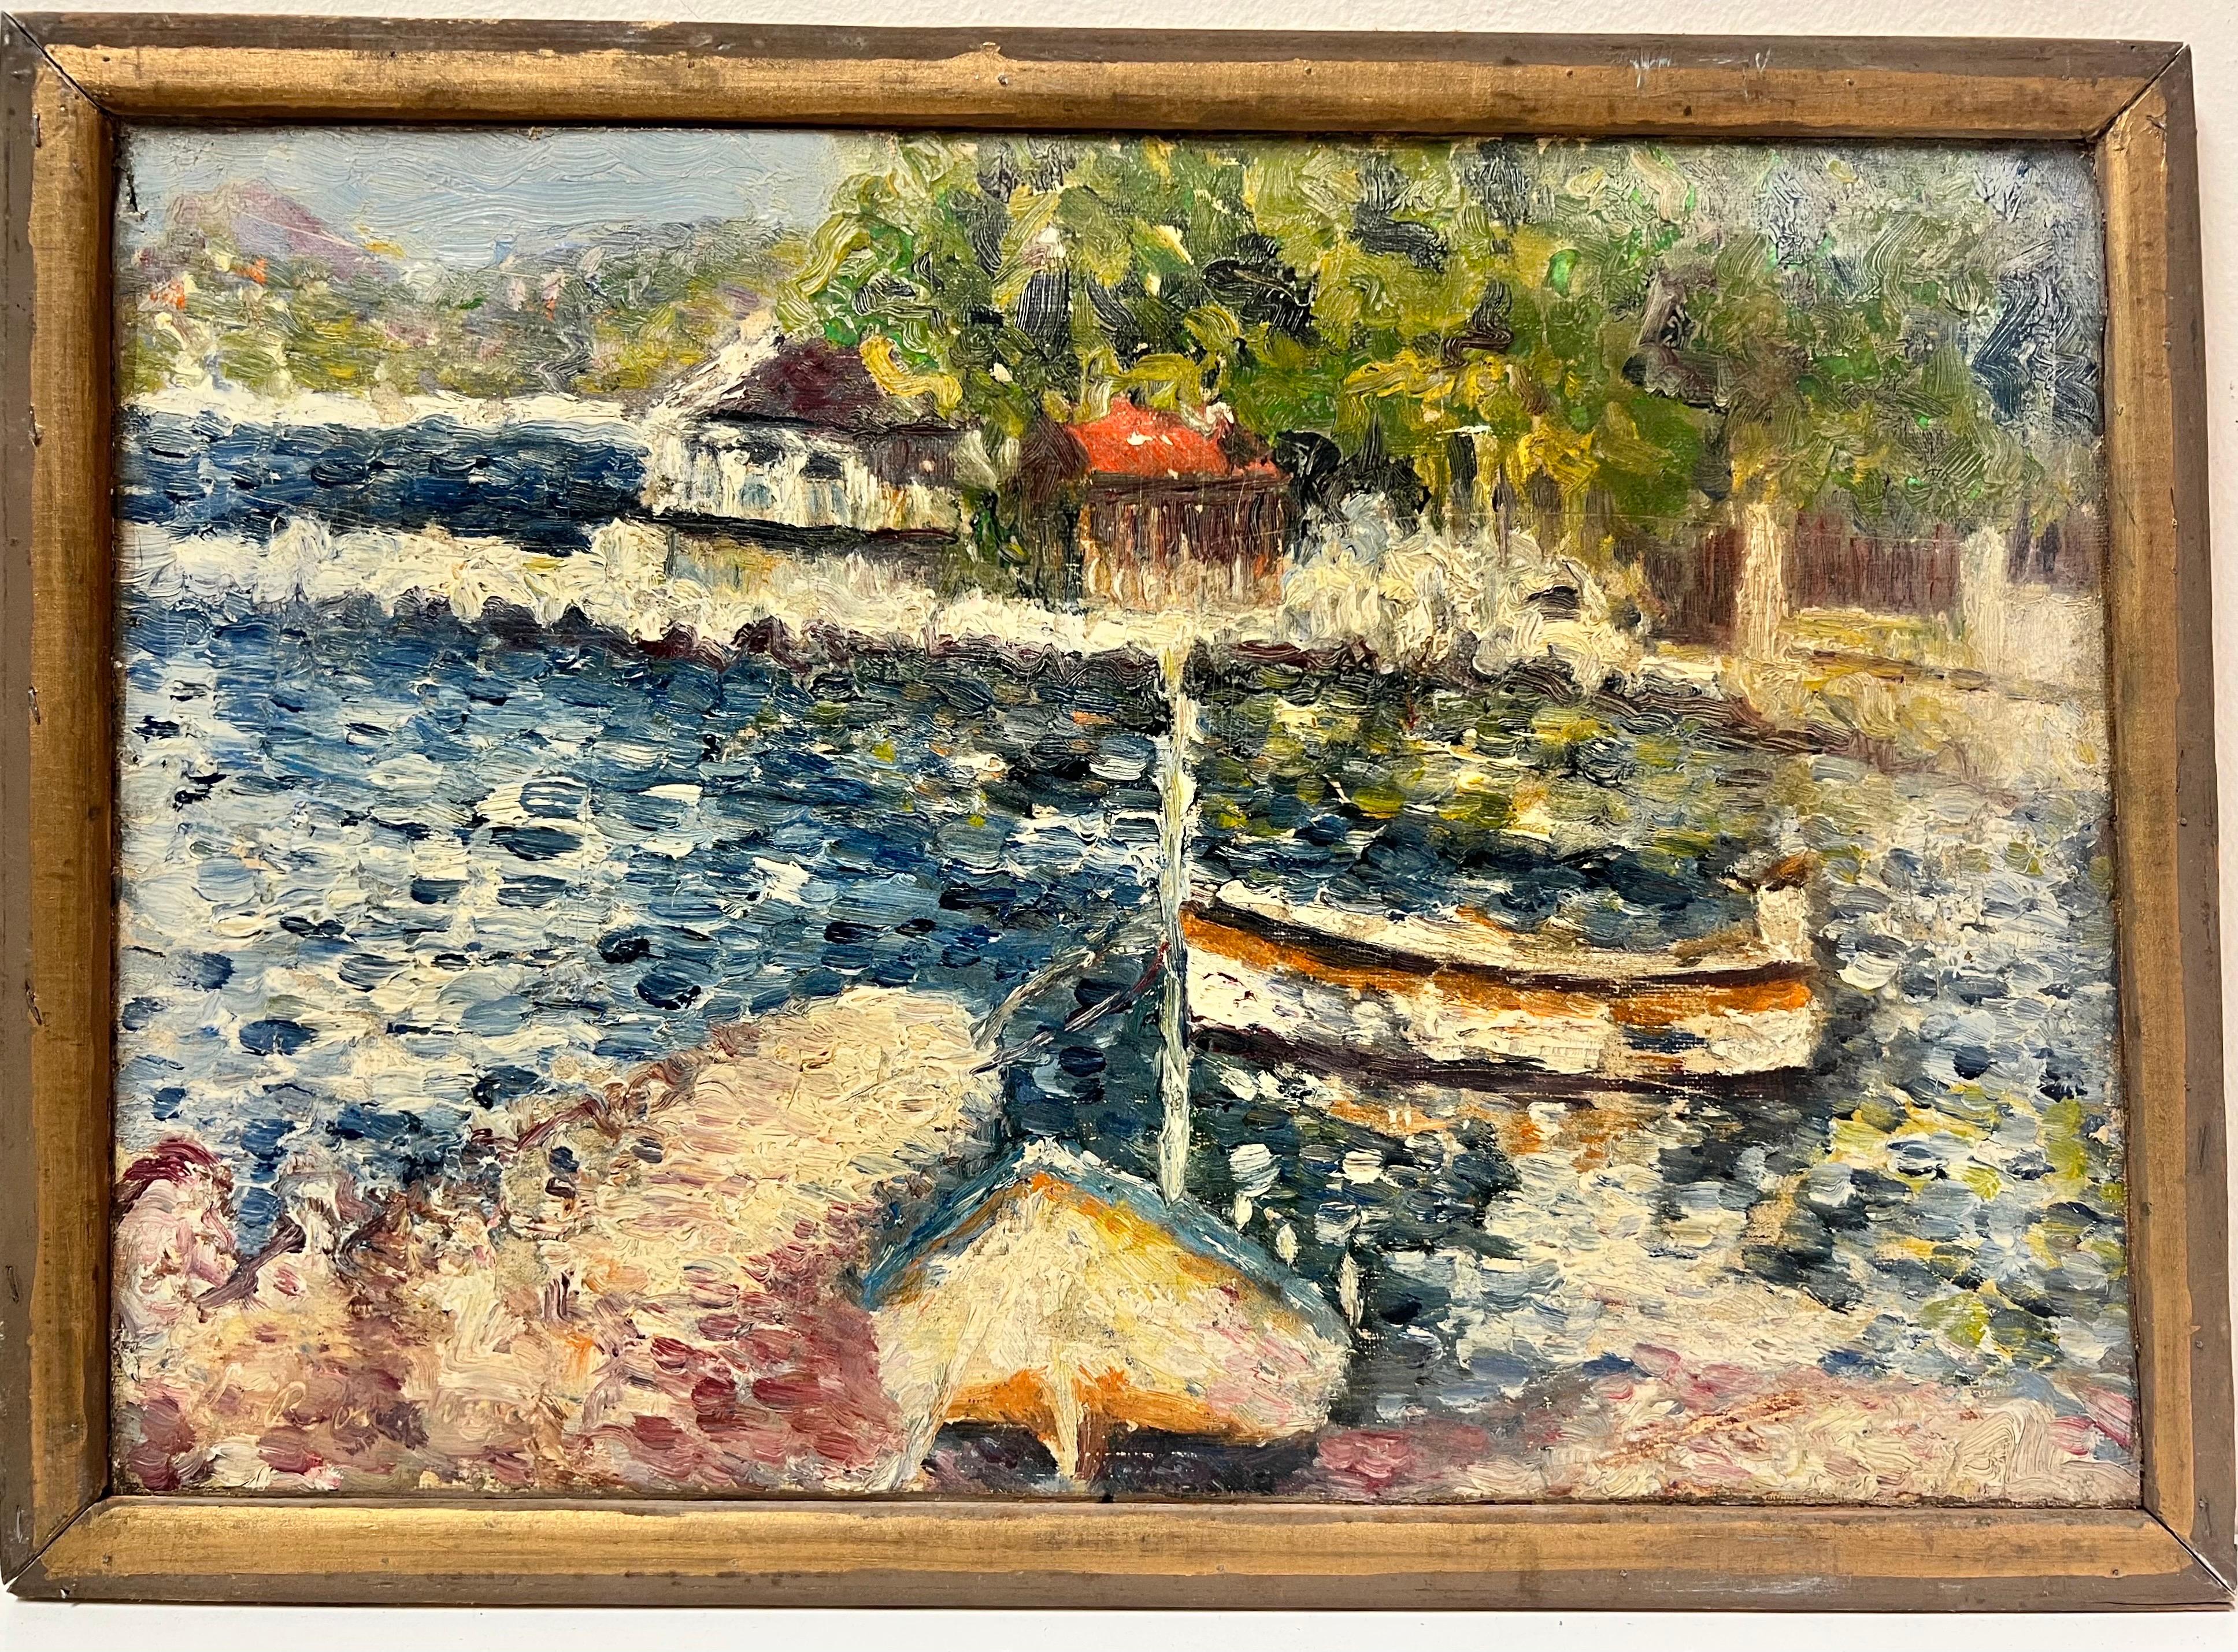 Boats in Harbor/ Villa in Landscape
French School, indistinctly signed
oil painting, framed
double sided
framed: 10.5 x 15 inches
canvas: 9.5 x 14 inches
provenance: private collection, France
condition: very good and sound condition - very fragile 